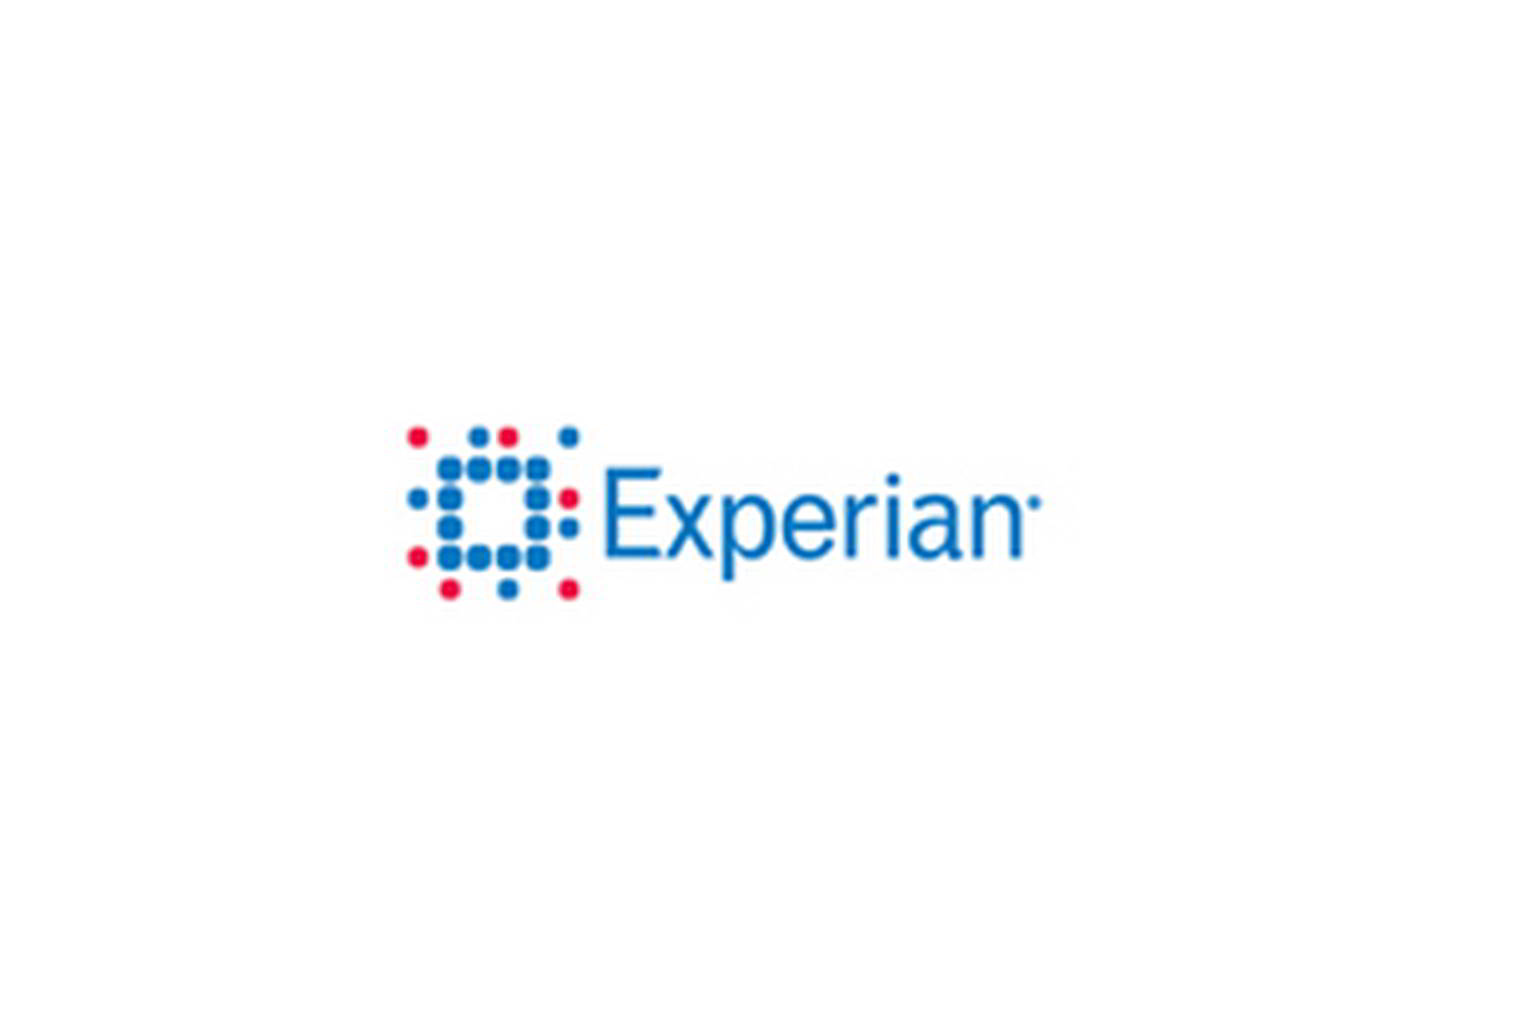 Experian customers enjoy special access to BizFilings